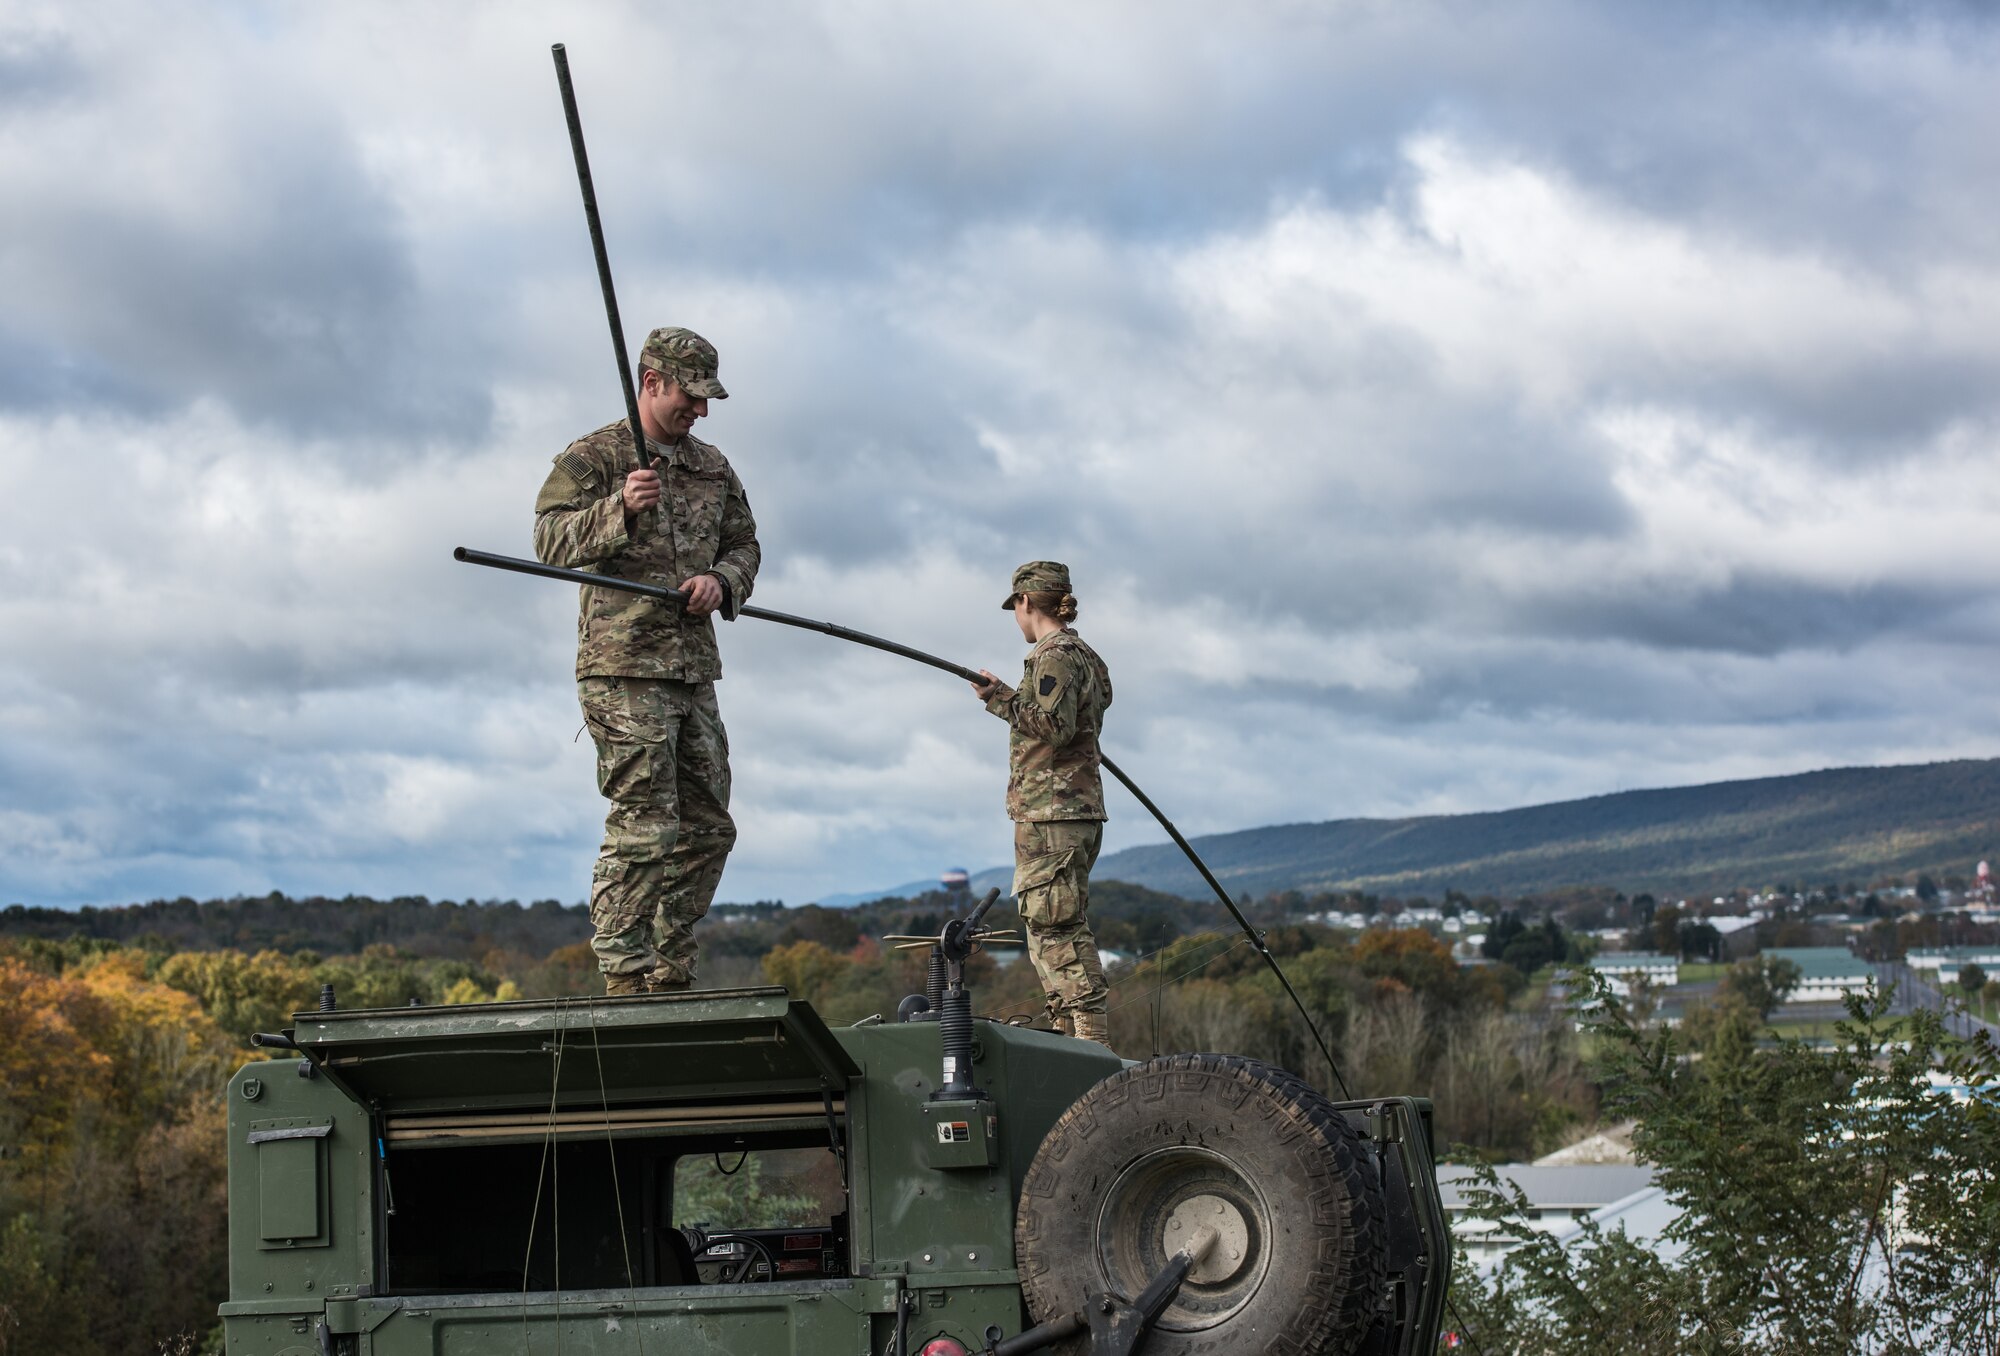 Staff Sgt. Patrick Kluyber and Staff Sgt. Chloe Rangel, both radio frequency transmission systems supervisors with the 148th Air Support Operations Squadron, Pennsylvania Air National Guard, assemble a whip antenna to mount on a Humvee.